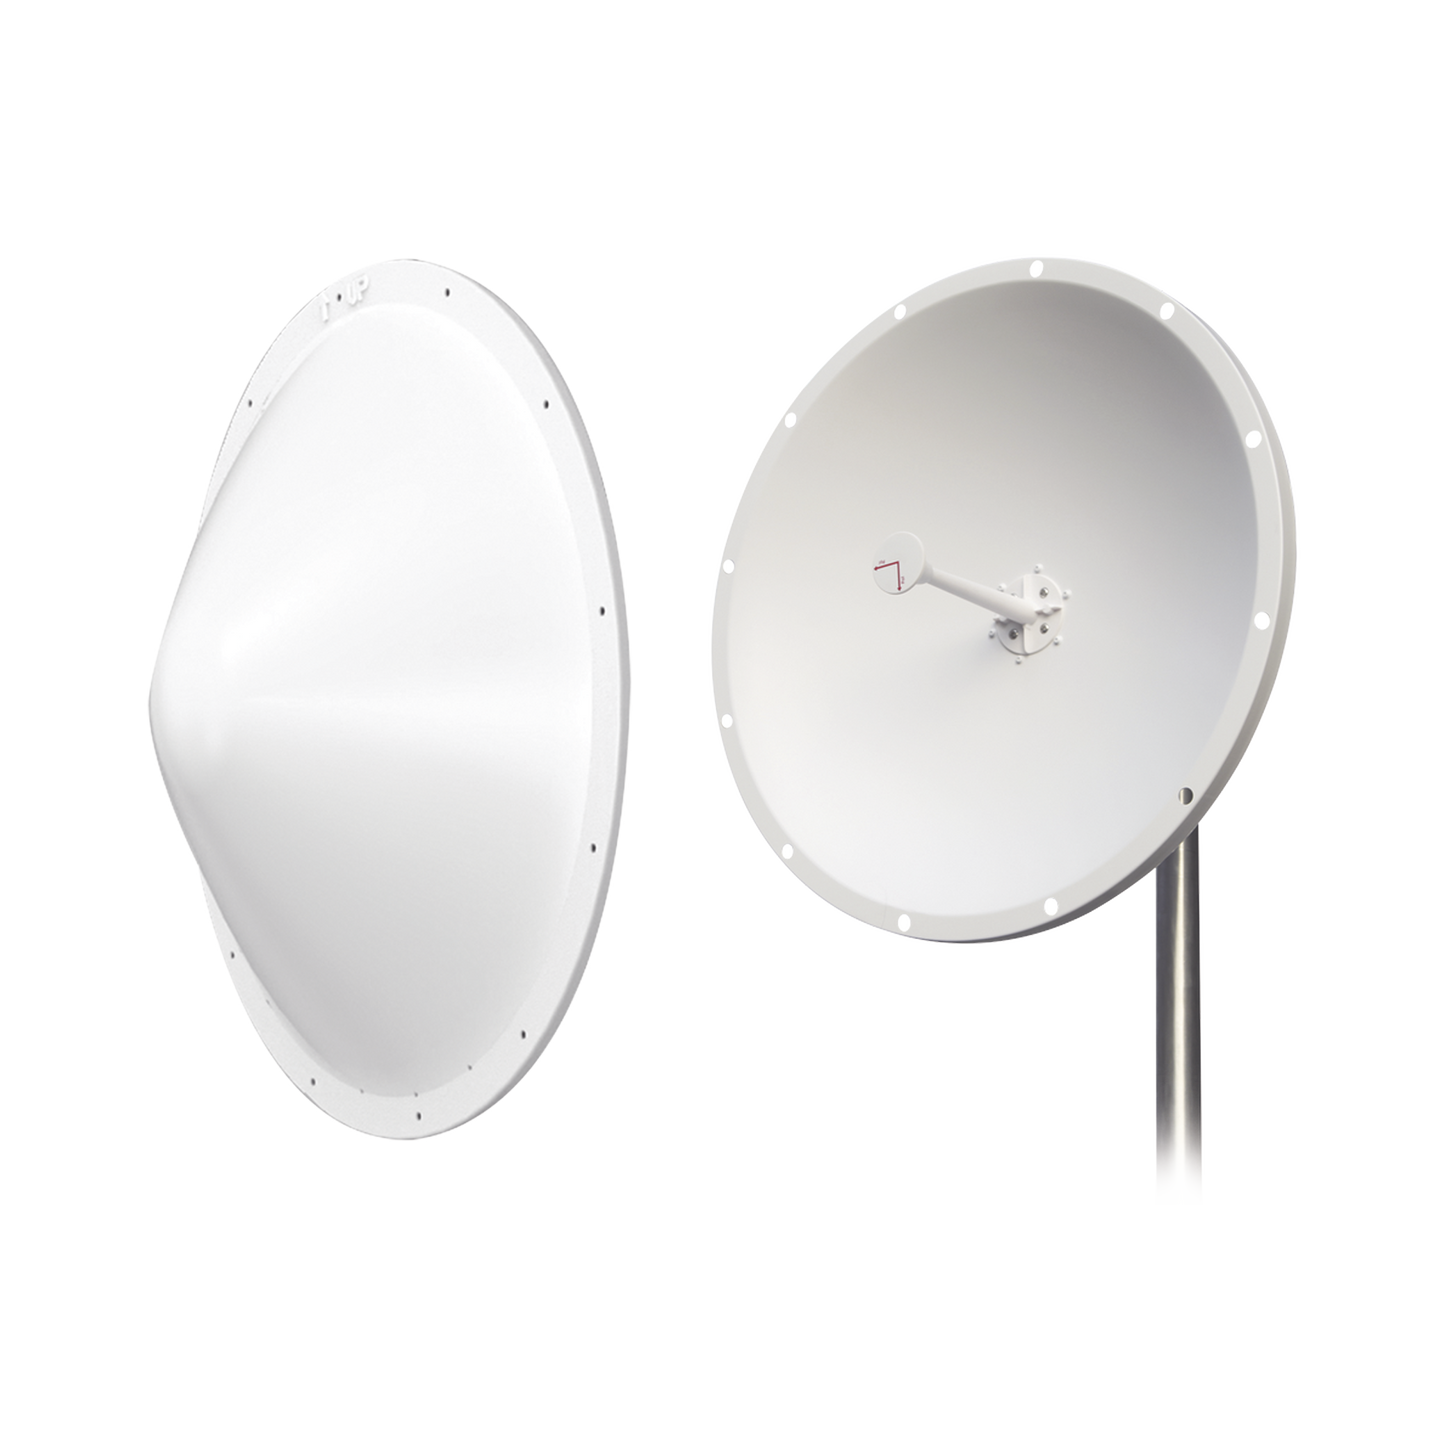 Antenna and radome kit, 28 dBi gain, extended frequency range (4.9 to 6.5 GHz), N-female connectors, includes jumper, distance up to 15 km